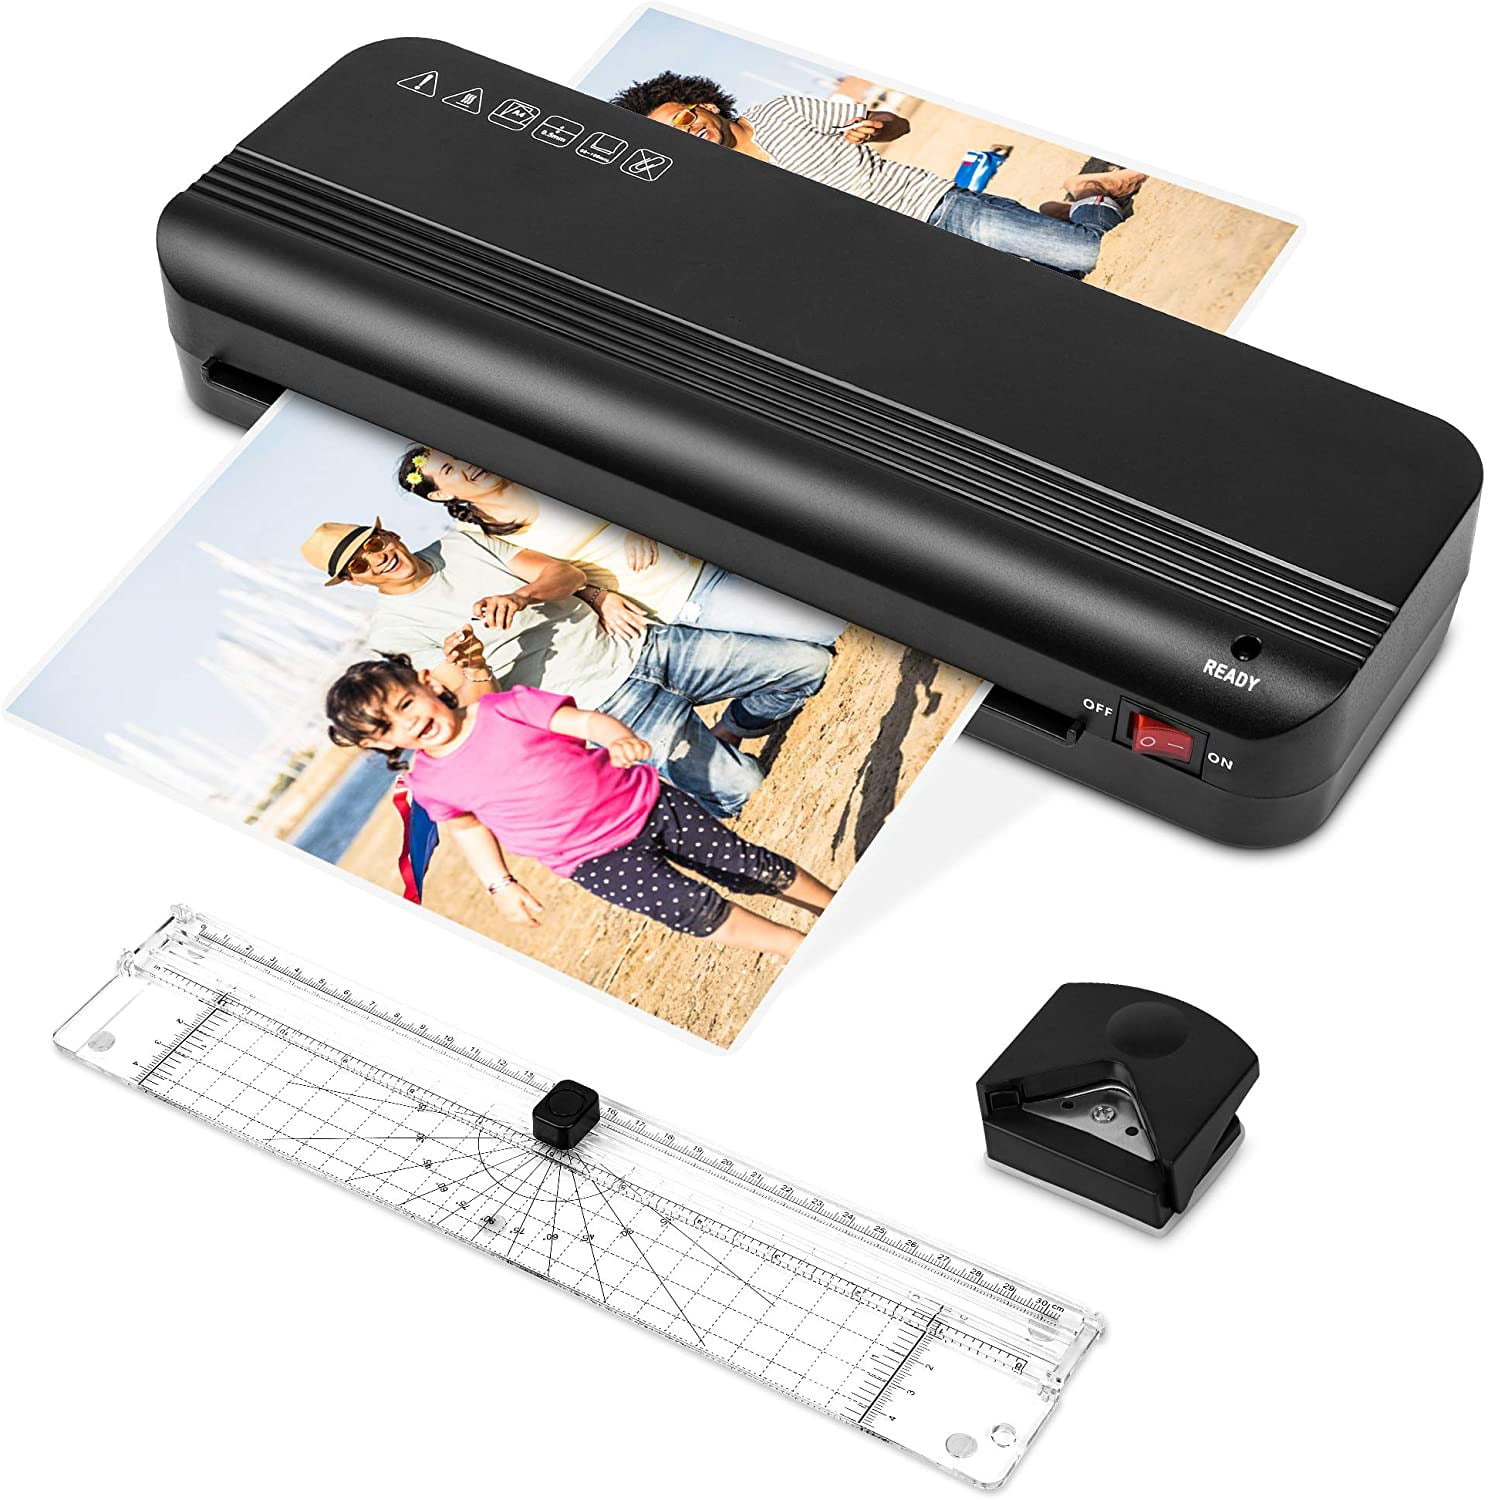 4-in-1 Thermal Cold Laminator for A4/A5/A6 Rapid Laminating ABS Anti-Jam with Paper Trimmer Laminator Gbasics Laminator Machine with Laminating Sheets Corner Rounder for Home Office School,9-inch 